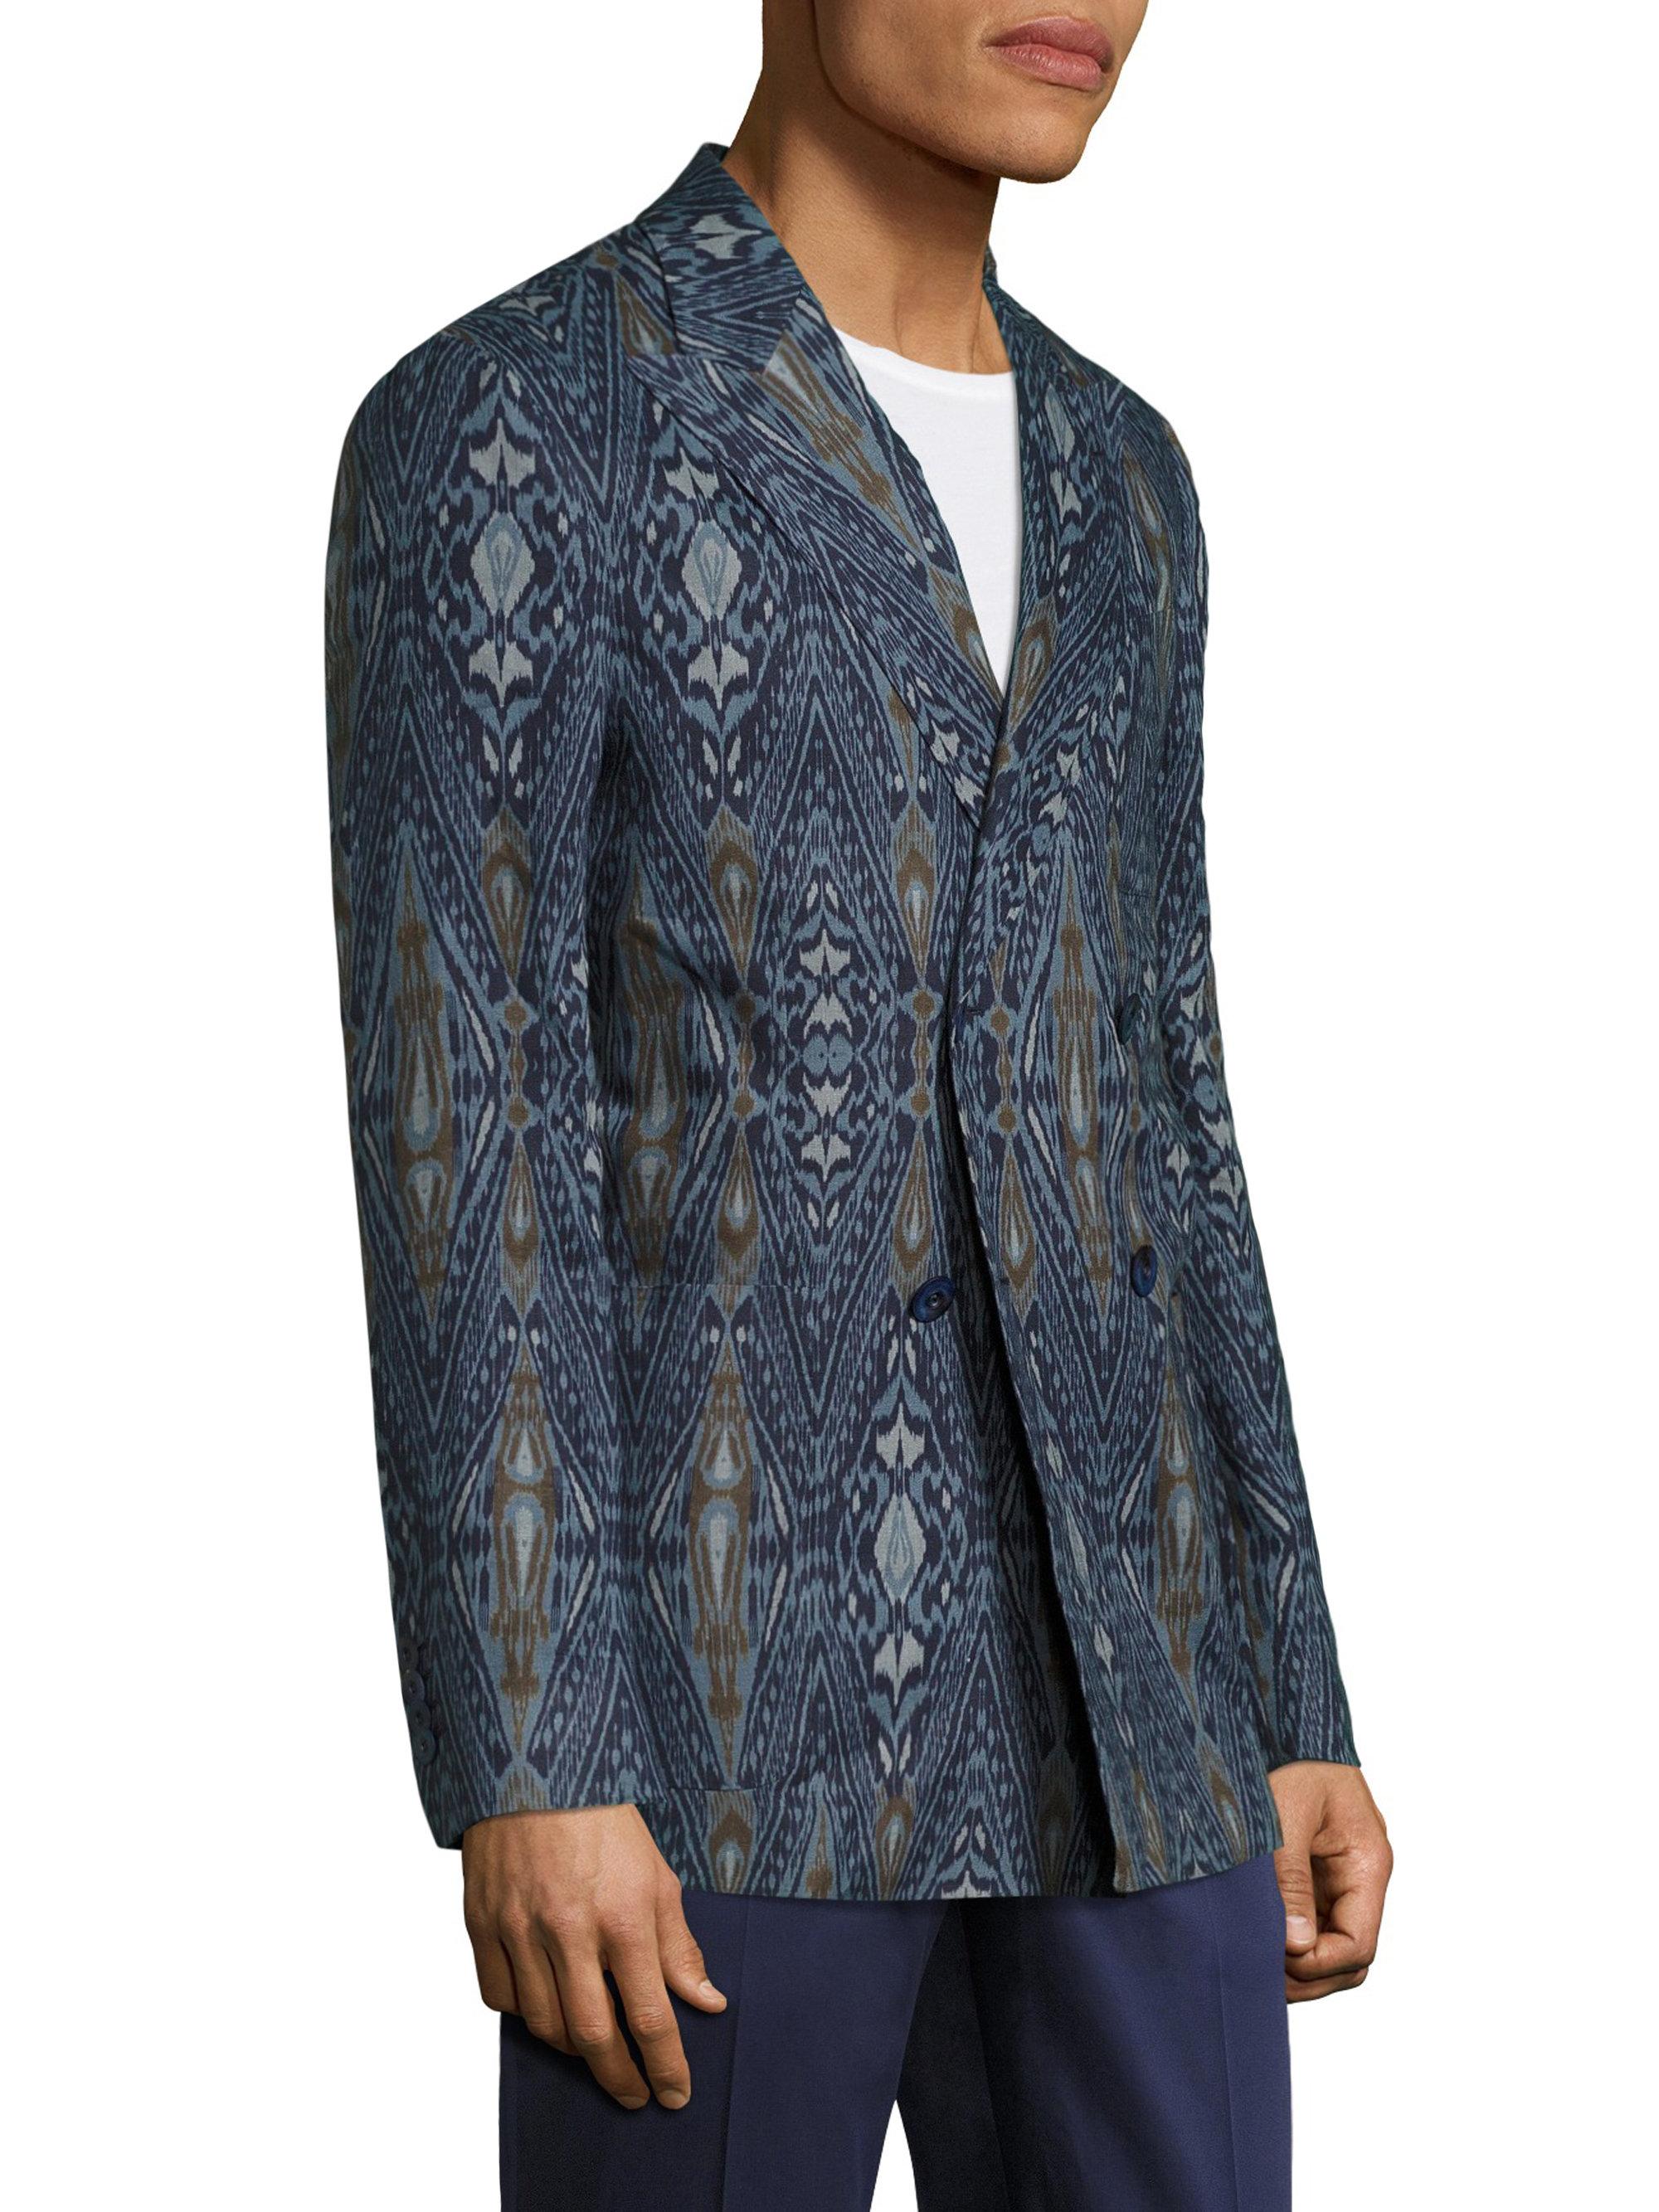 Lyst - Etro Ikat Printed Linen Over Jacket in Blue for Men